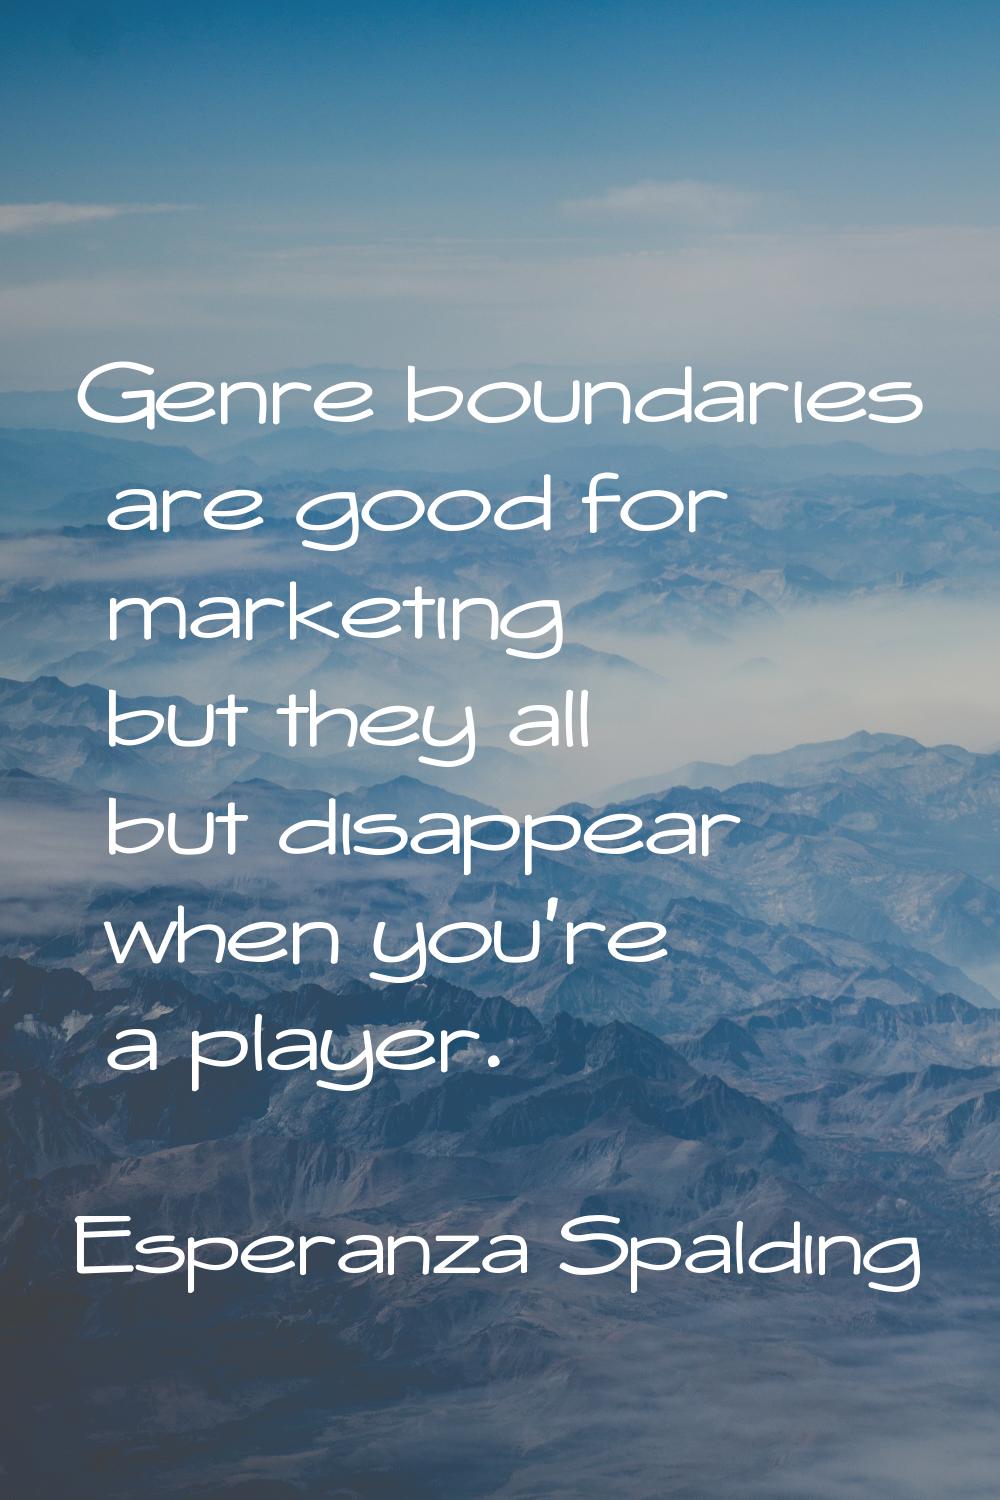 Genre boundaries are good for marketing but they all but disappear when you're a player.